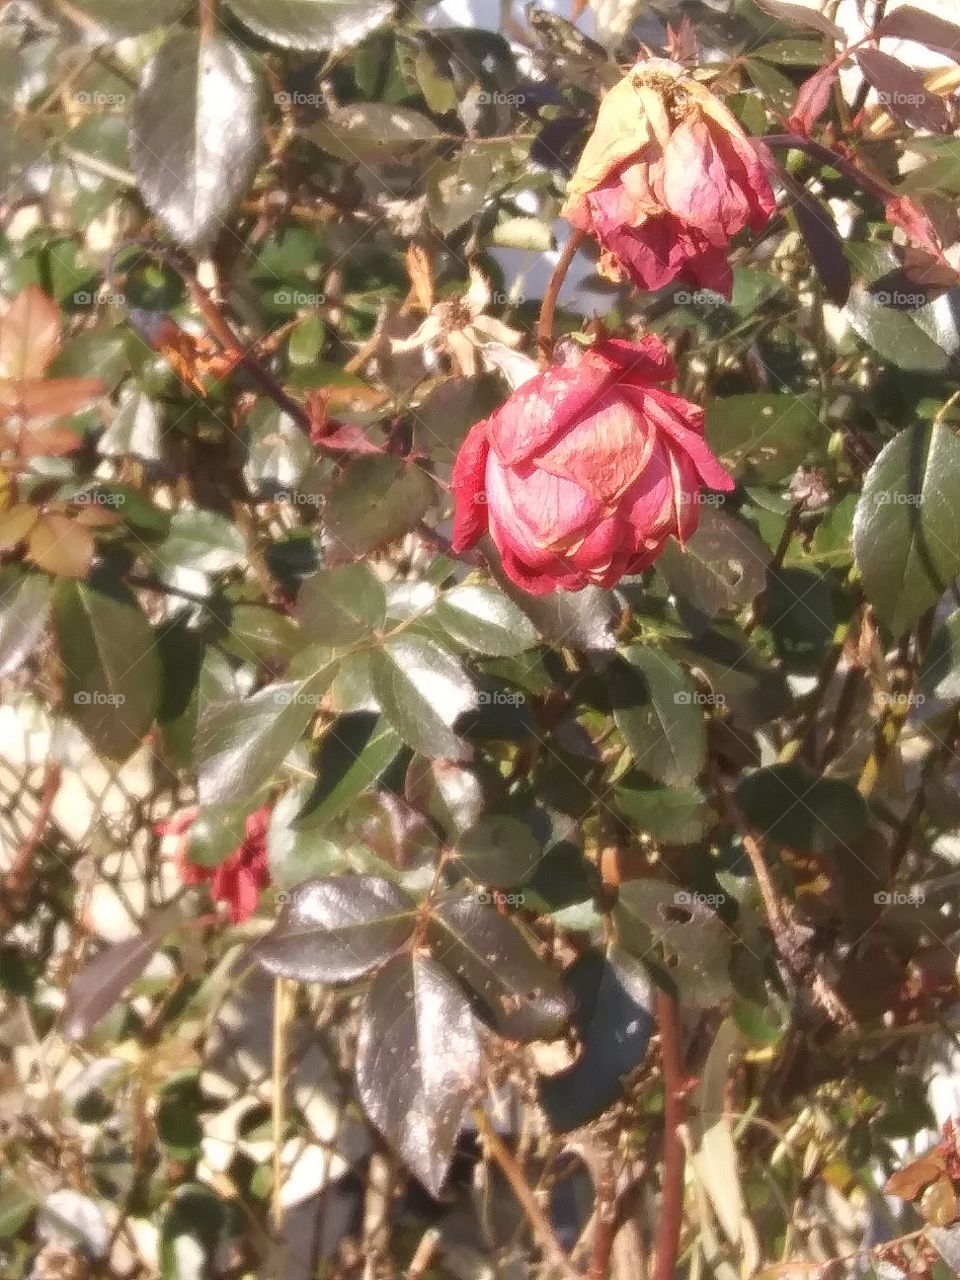 roses dying